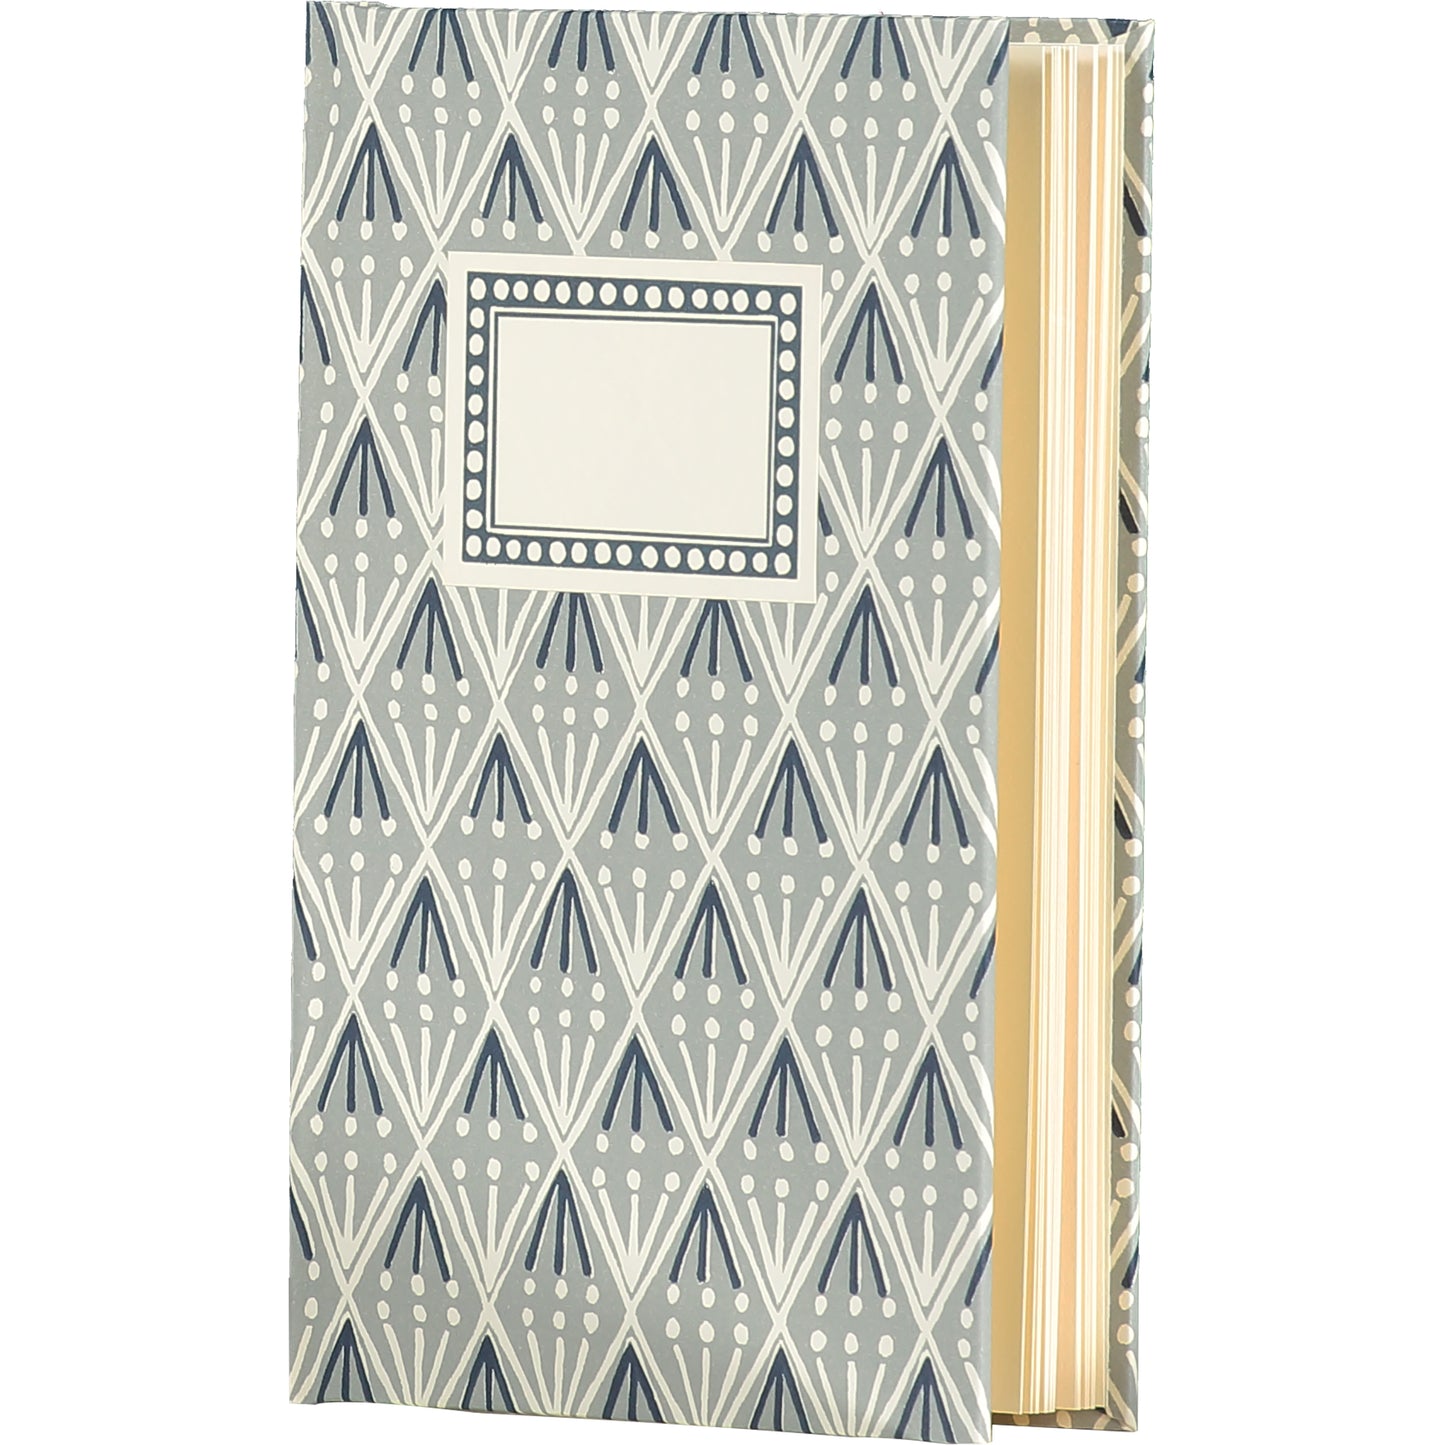 The Selvedge Notebook by Cambridge Imprint (Available in three colourways)